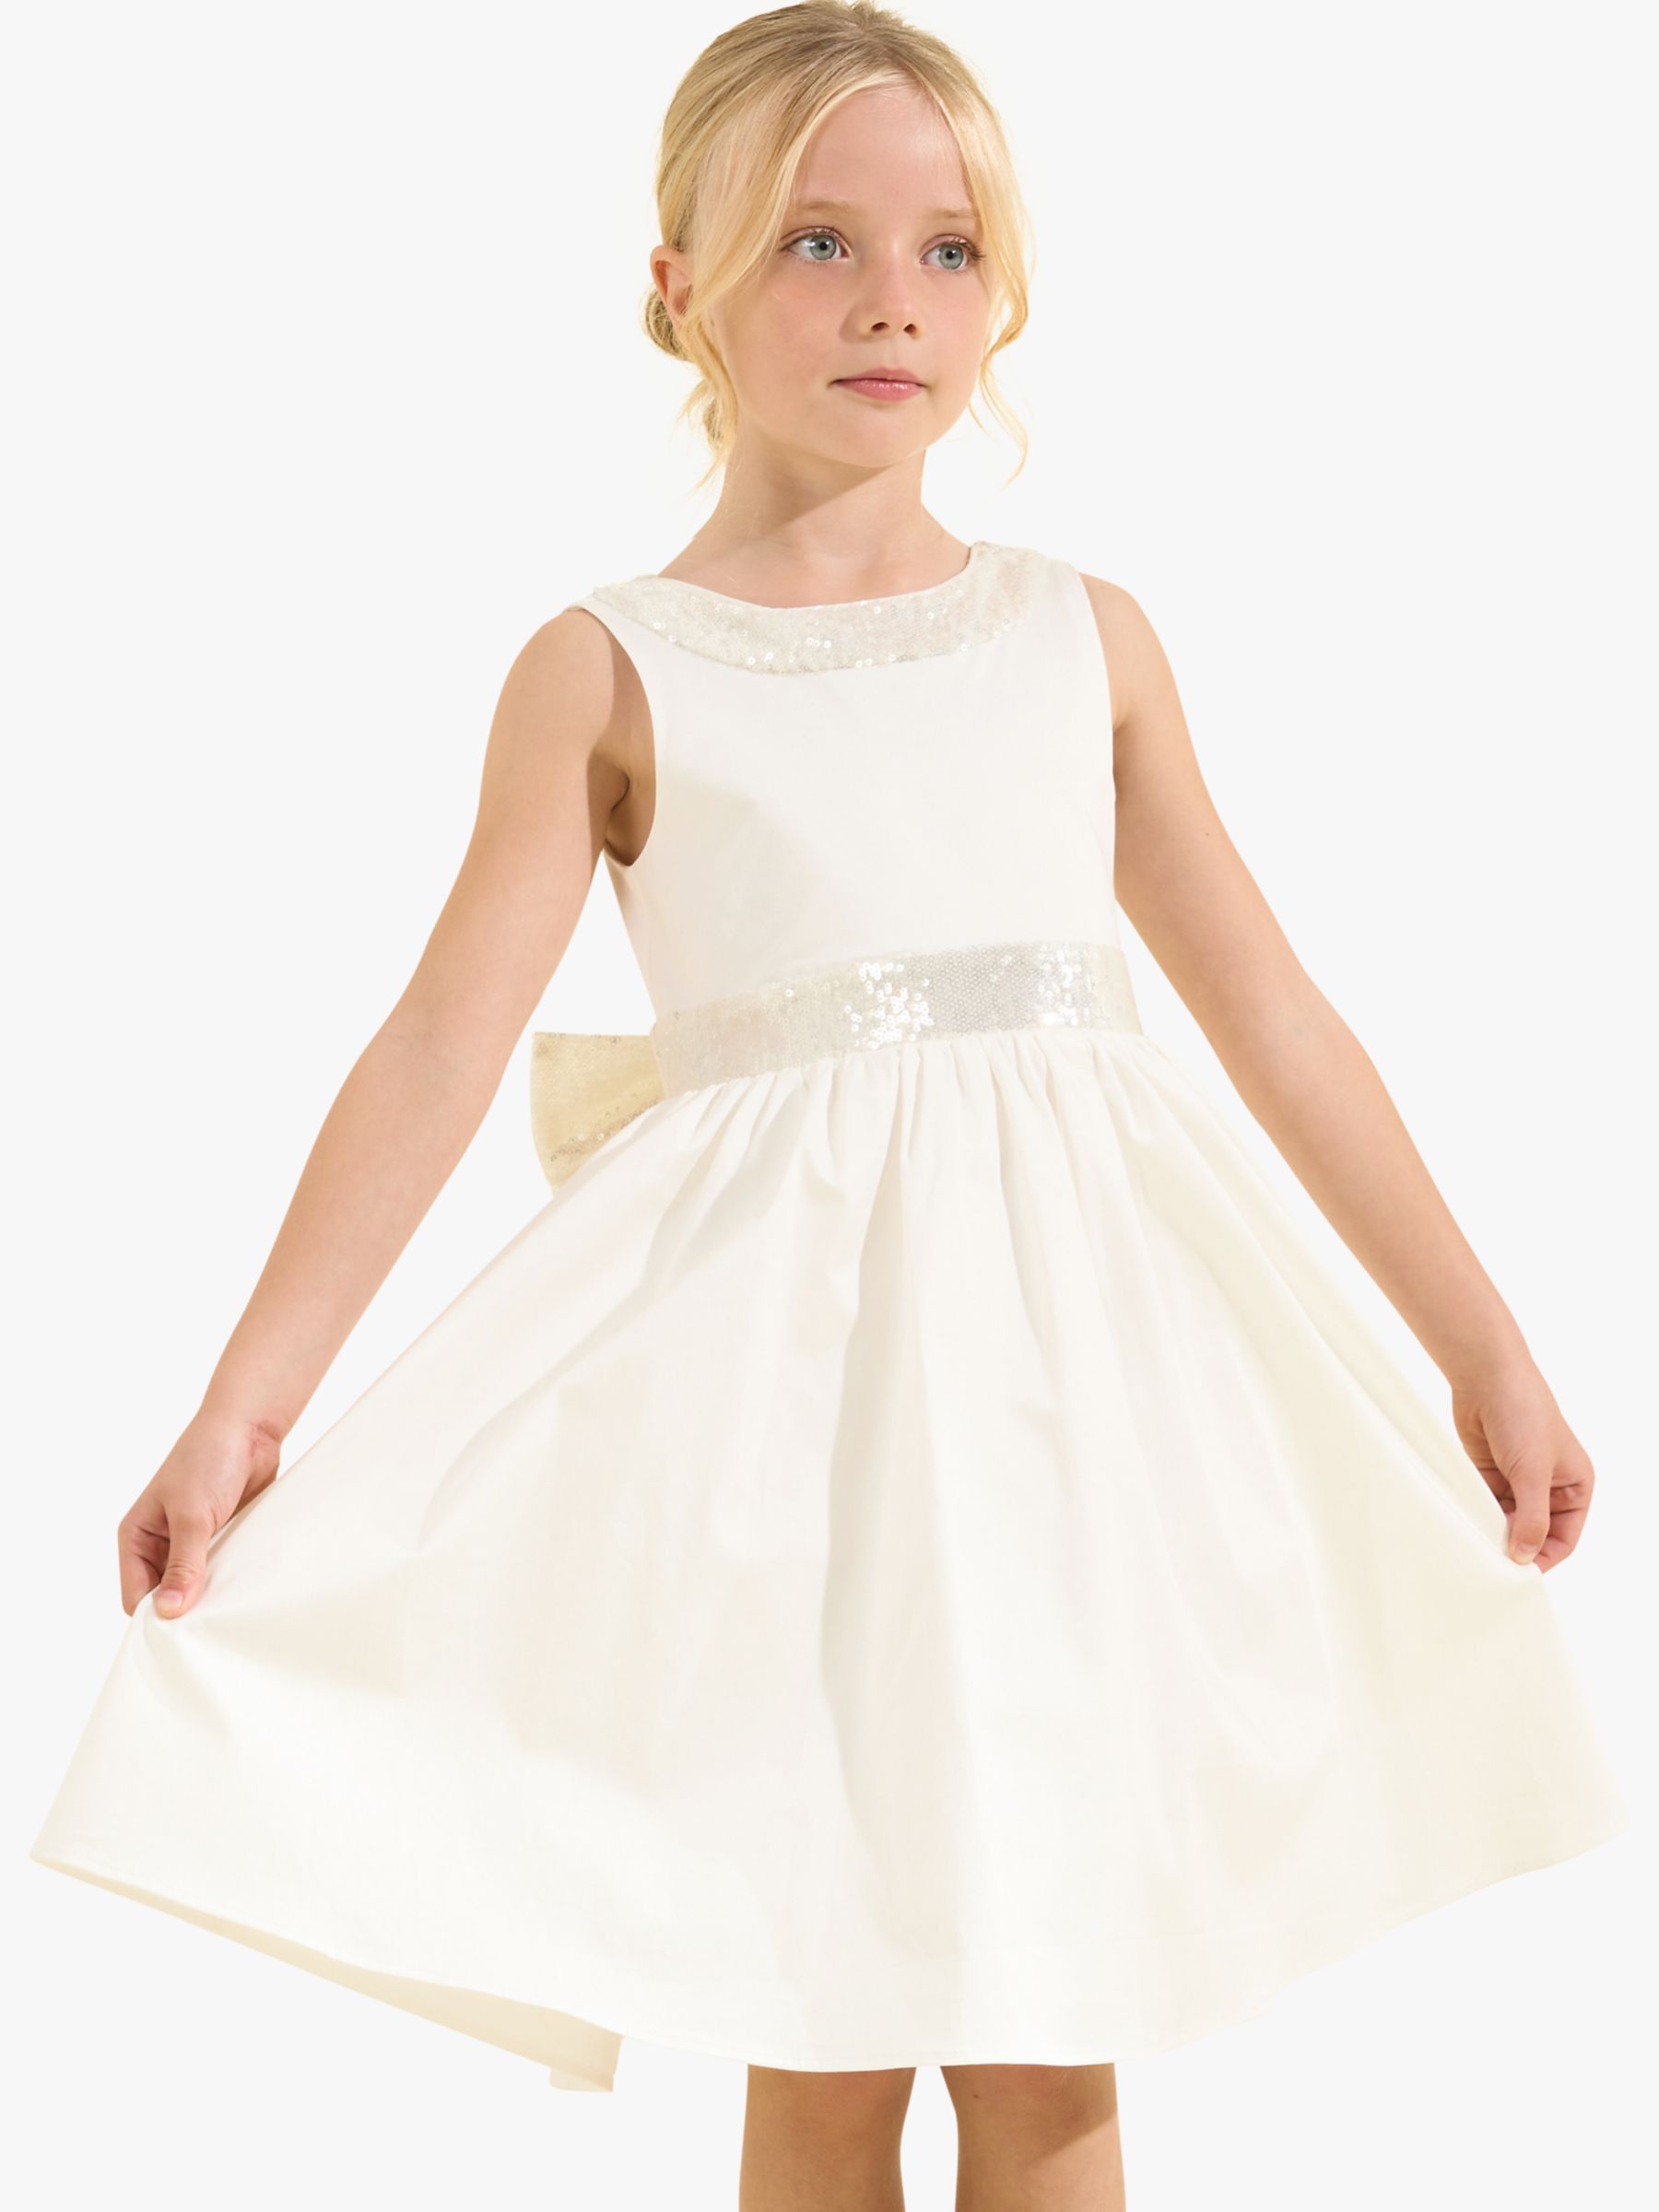 Angel & Rocket Kids' Sequin Bow Occasion Dress, Silver/Ivory, 12 years